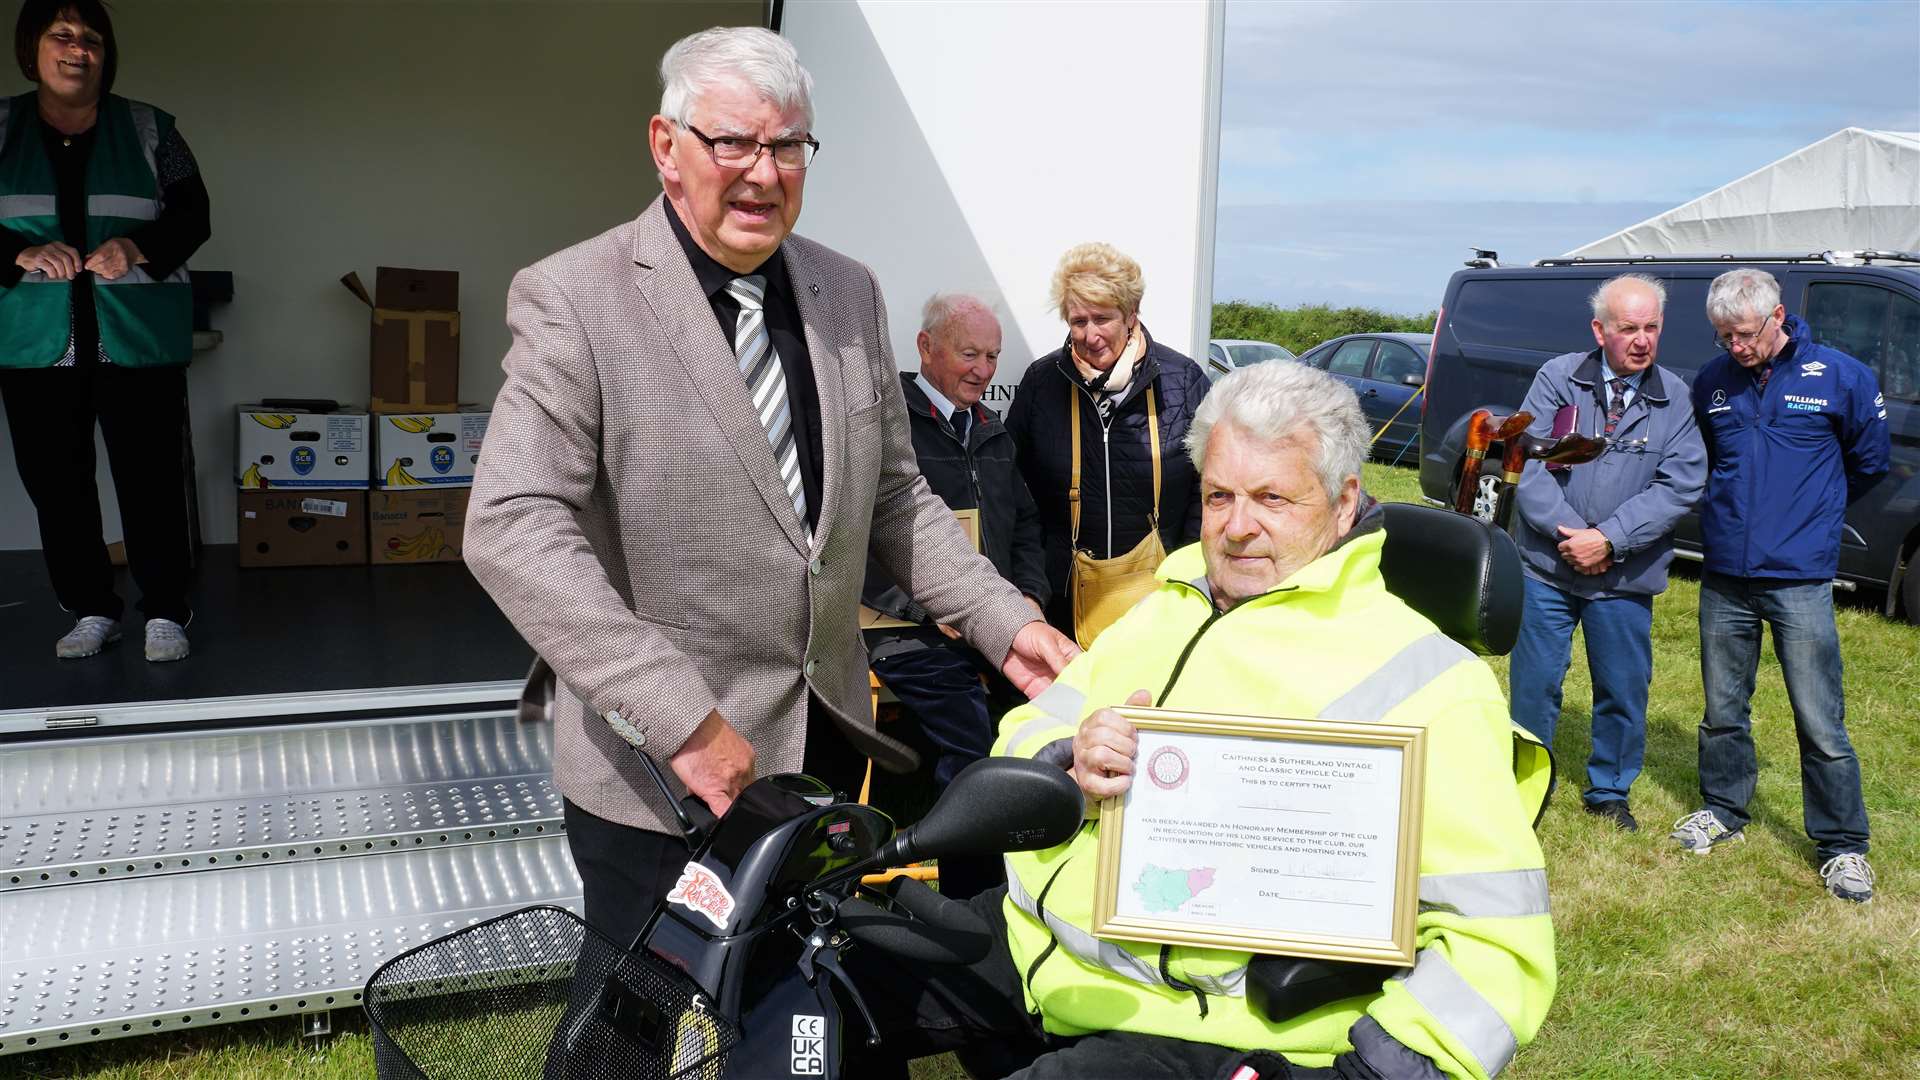 Iain Sutherland gives an honorary award to the late David Green at the club's annual rally in John O’ Groats earlier this year. Picture: DGS